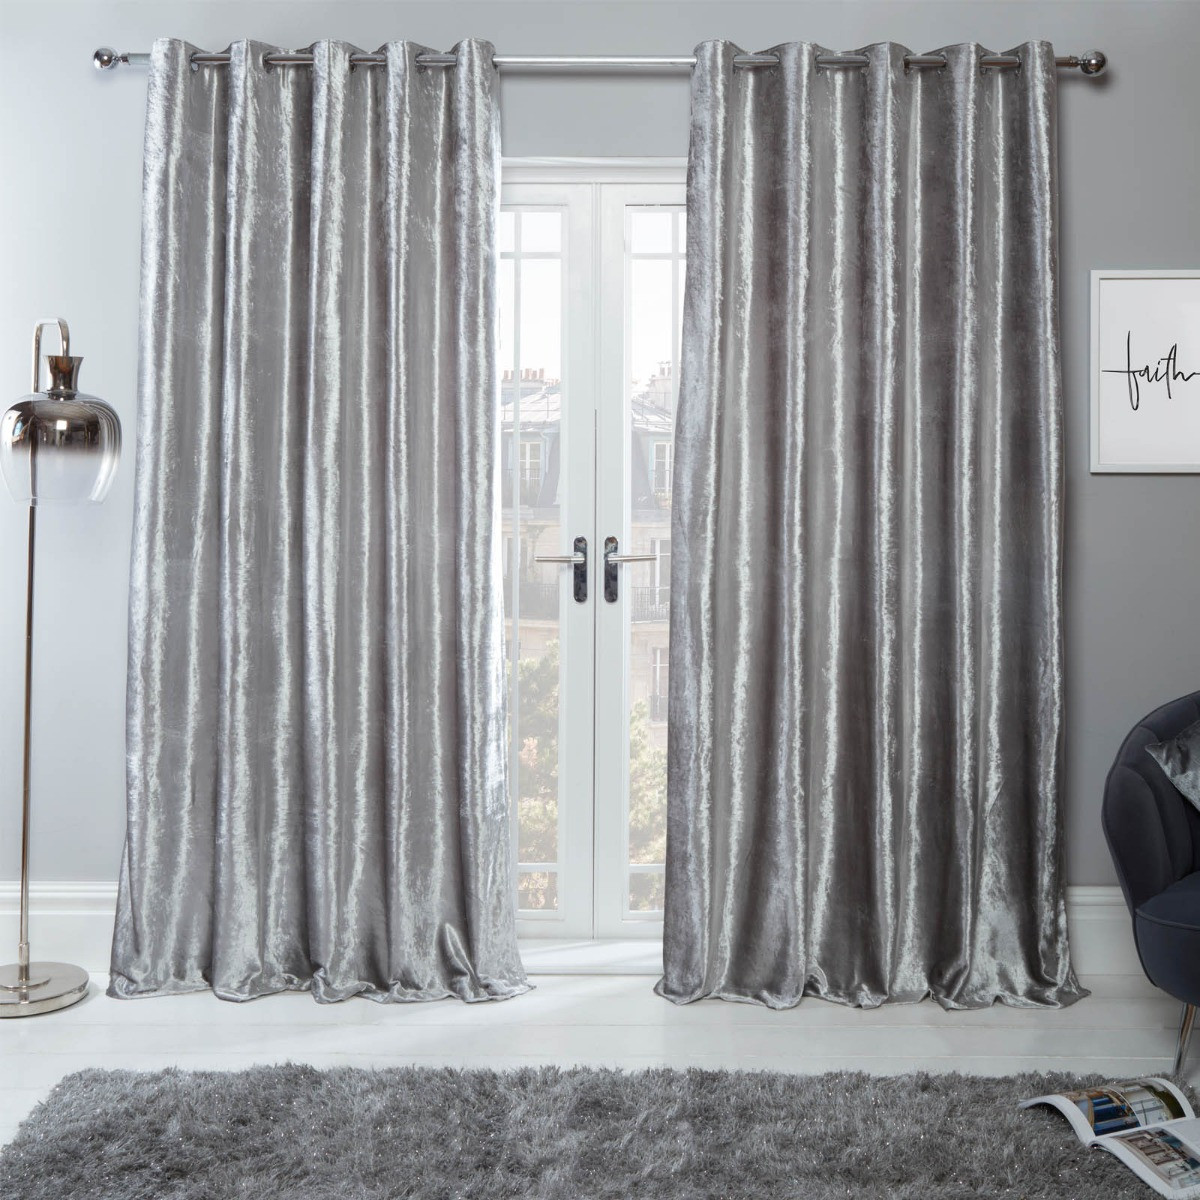 Sienna Home Crushed Velvet Eyelet Curtains - Silver 46" x 90">